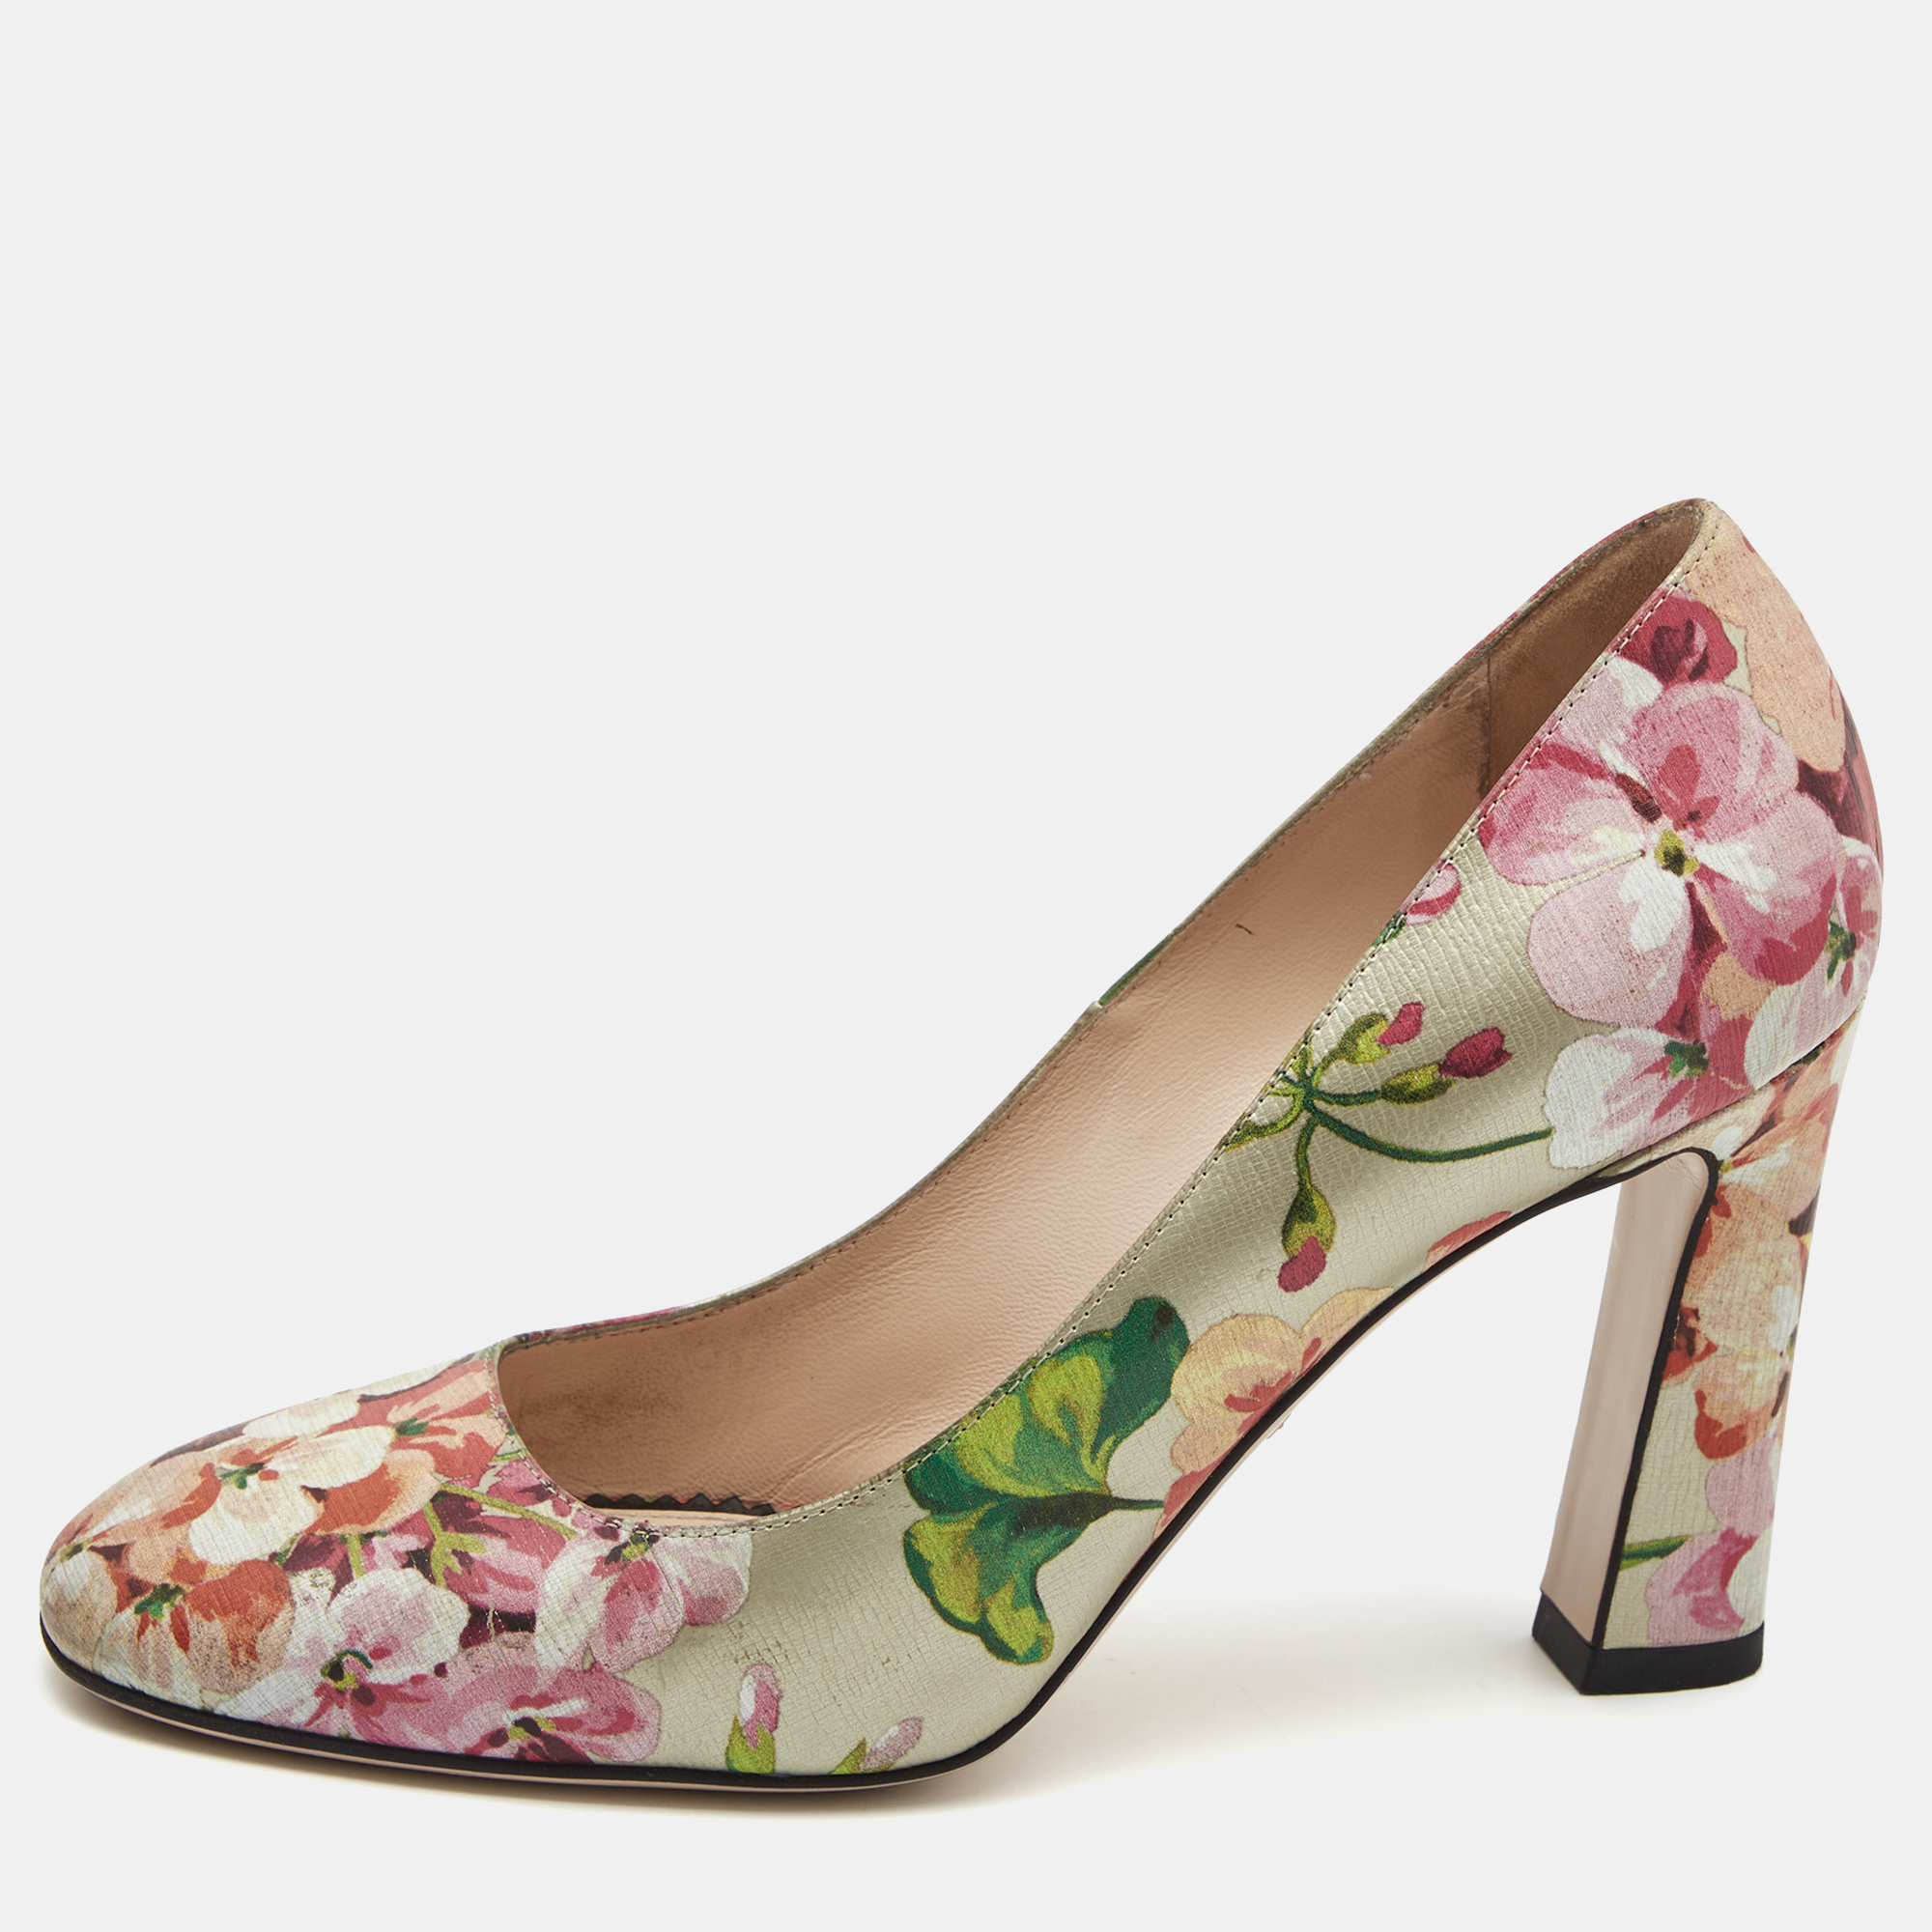 Pre-owned Gucci Multicolor Floral Leather Block Heel Pumps Size 37.5